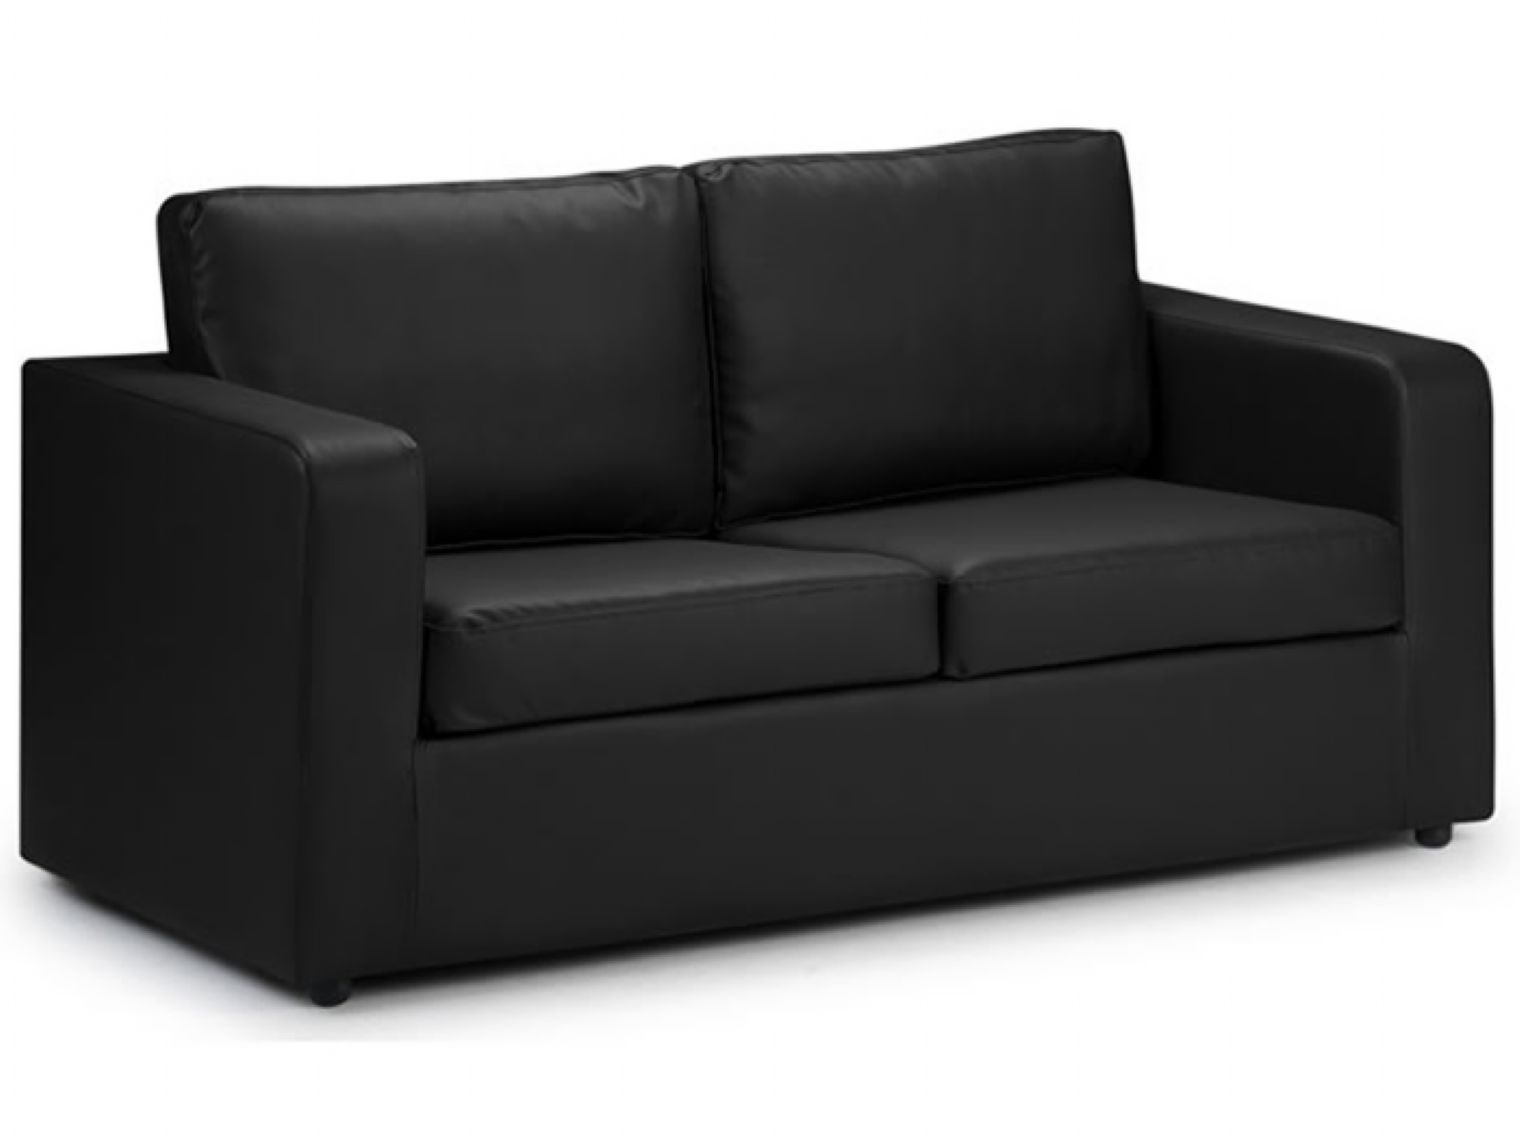 Click Clack Sofa Bed | Sofa chair bed | Modern Leather sofa bed ikea